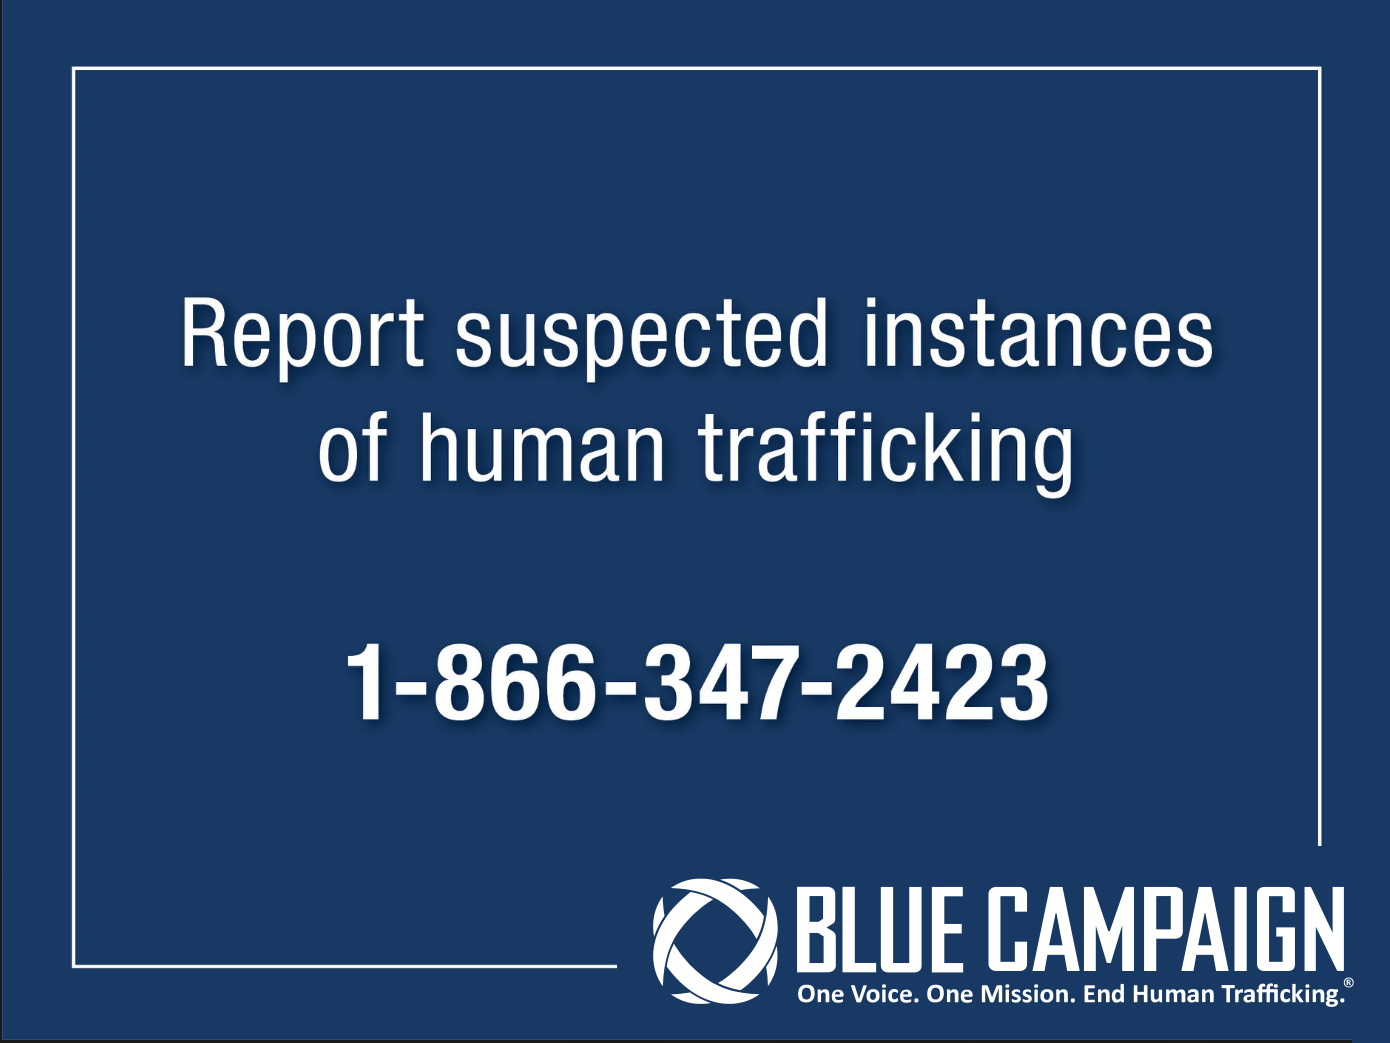 Report suspected instances of human trafficking at 1-866-347-2423. Blue Campaign. One Voice. One Mission. End Human Trafficking.